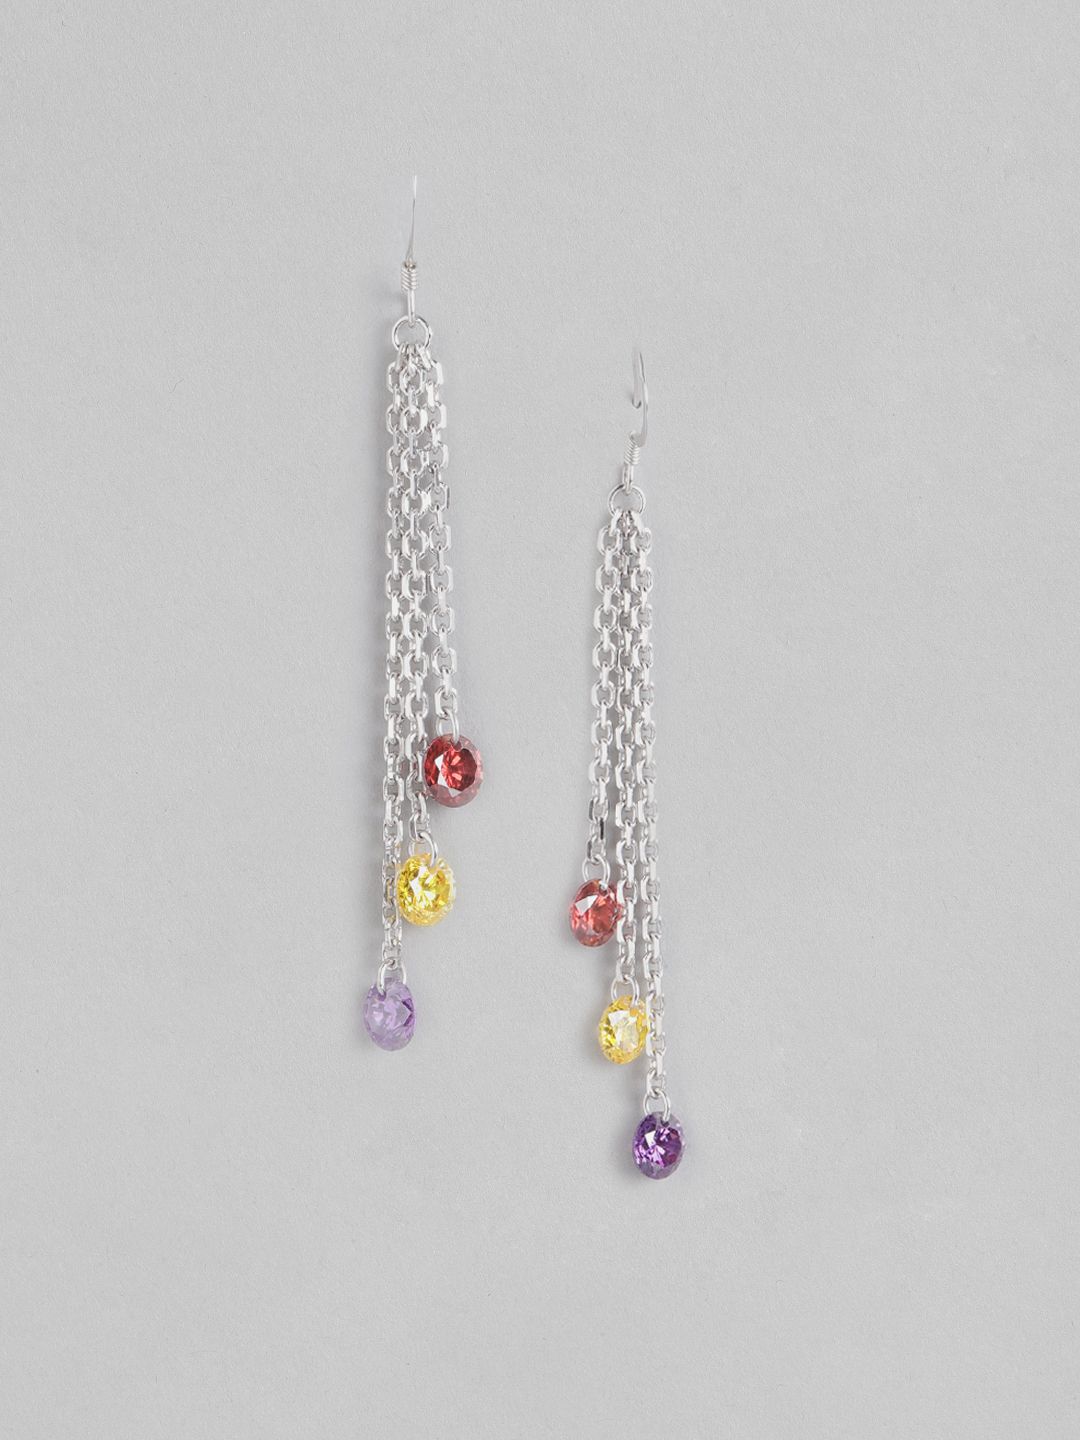 Carlton London Silver-Toned & Red Rhodium-Plated CZ Studded Contemporary Drop Earrings Price in India